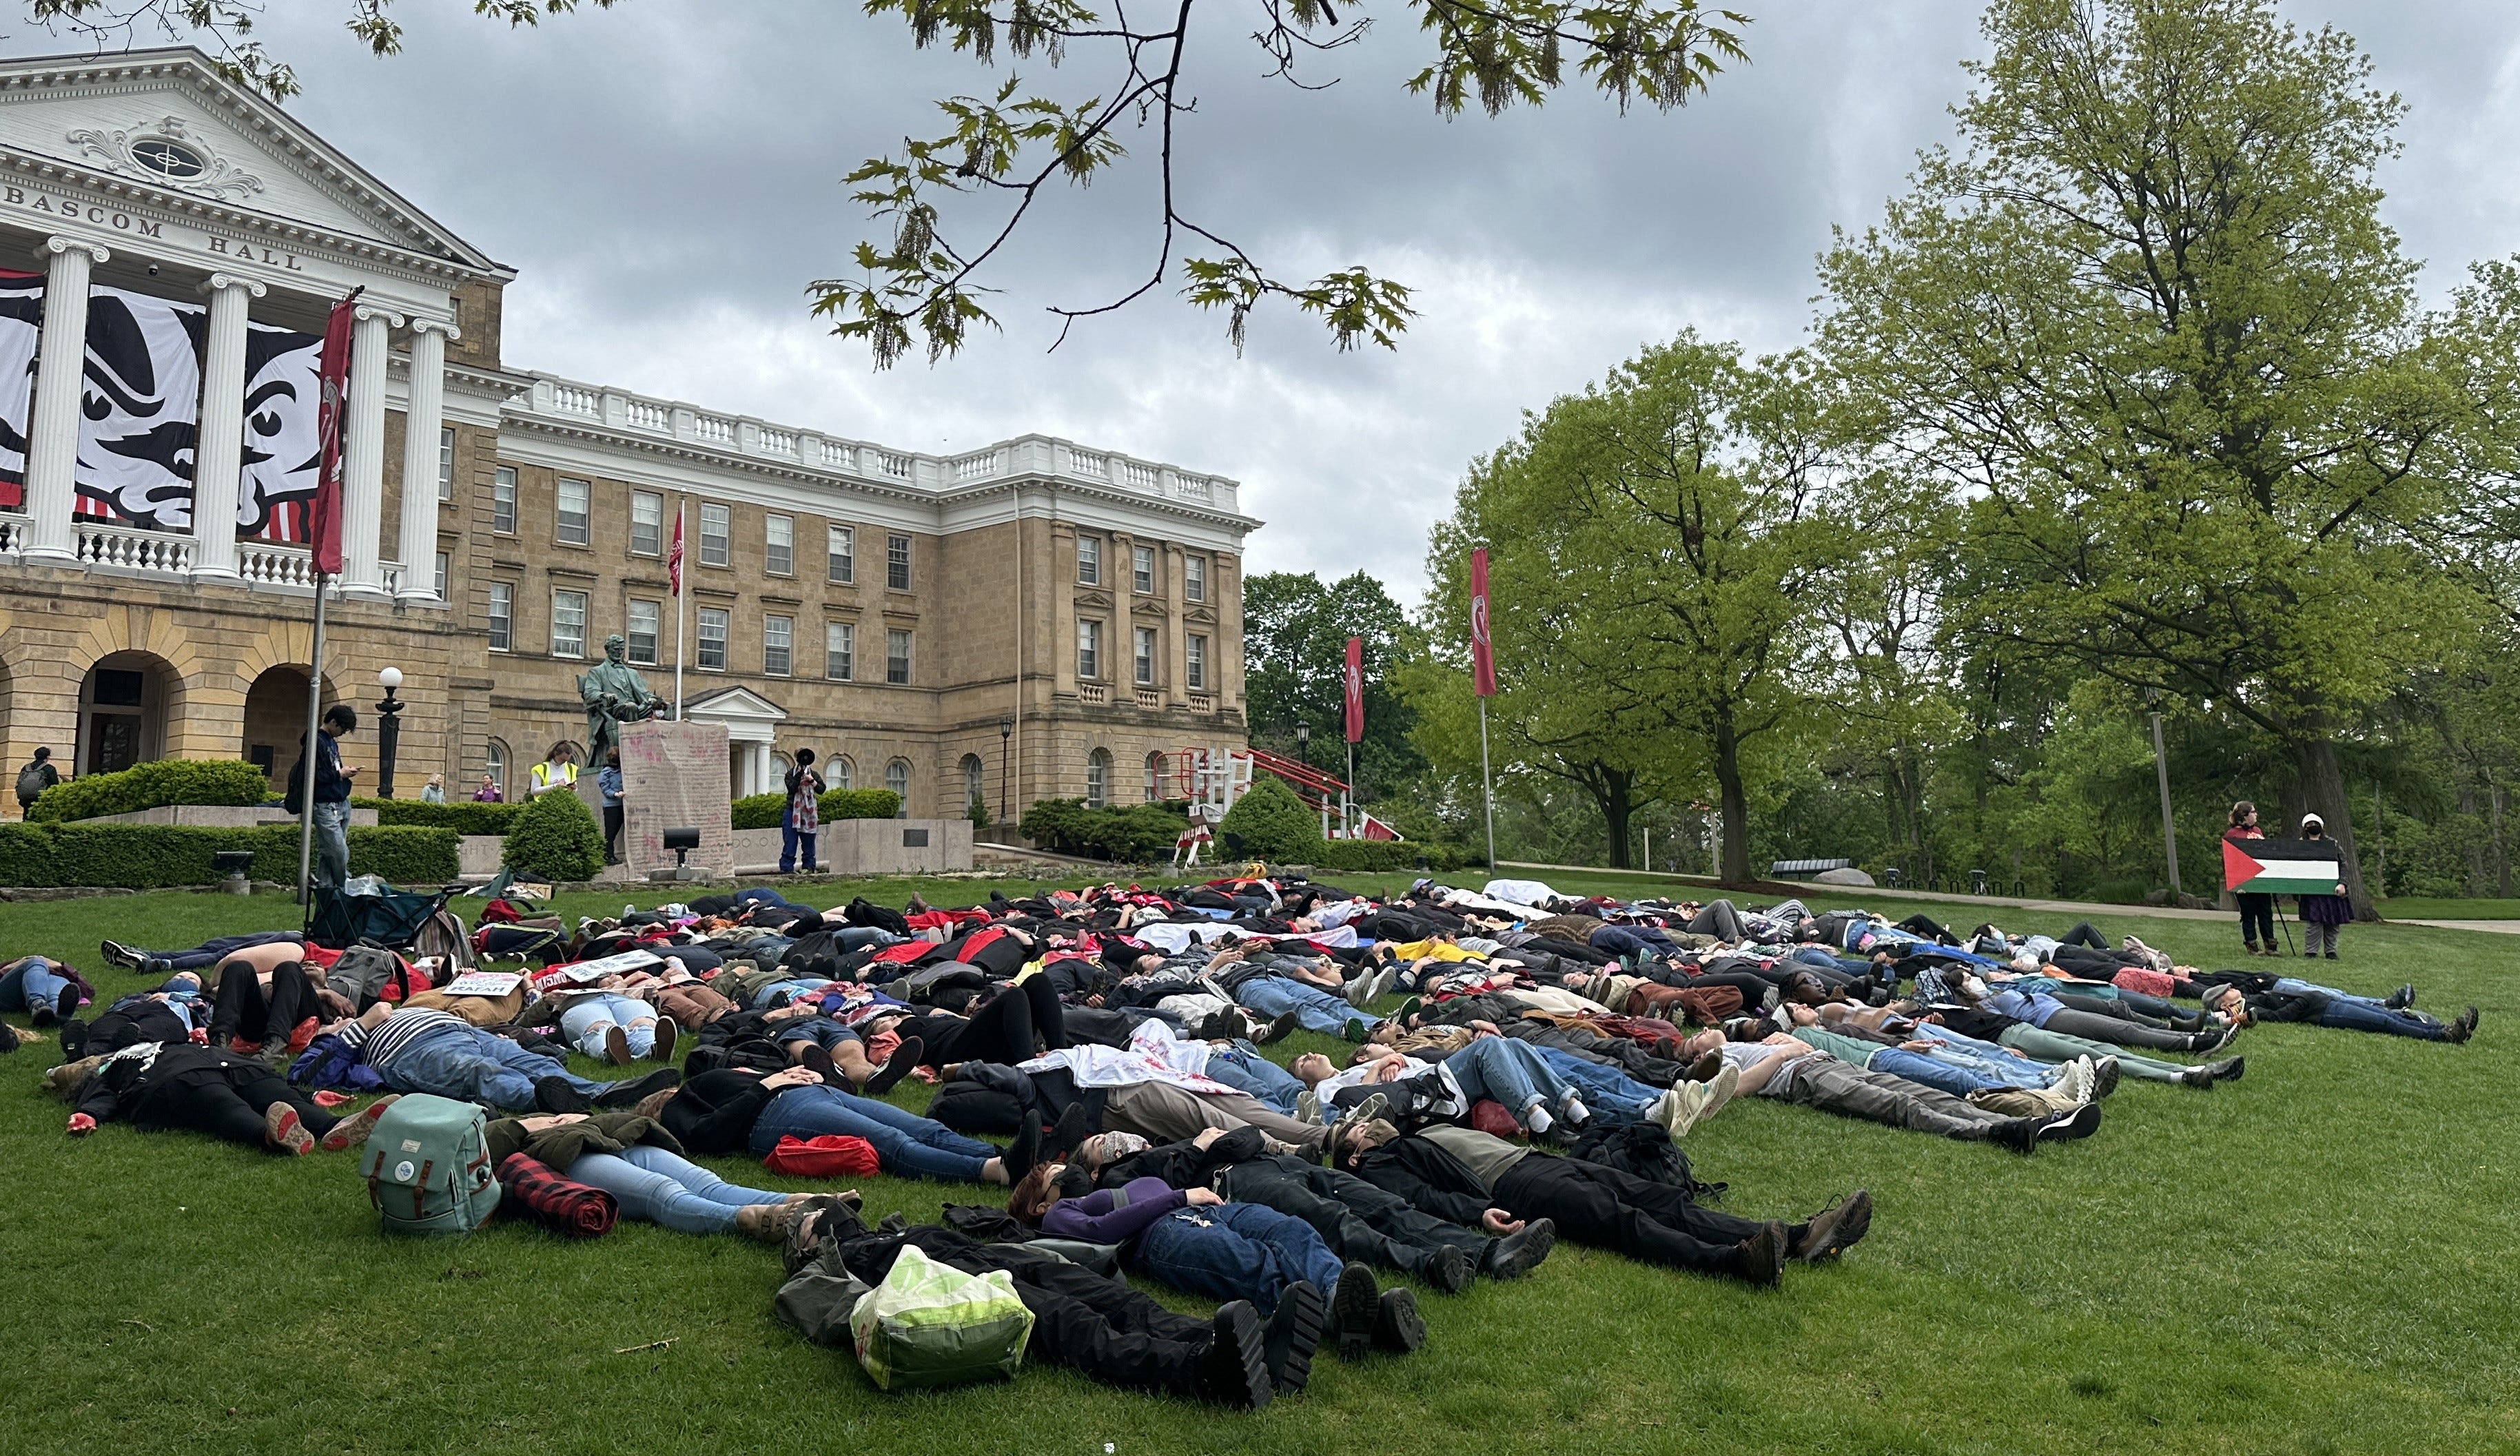 UW-Madison students take part in 'die-in' at Pro-Palestinian rally on campus: Live updates